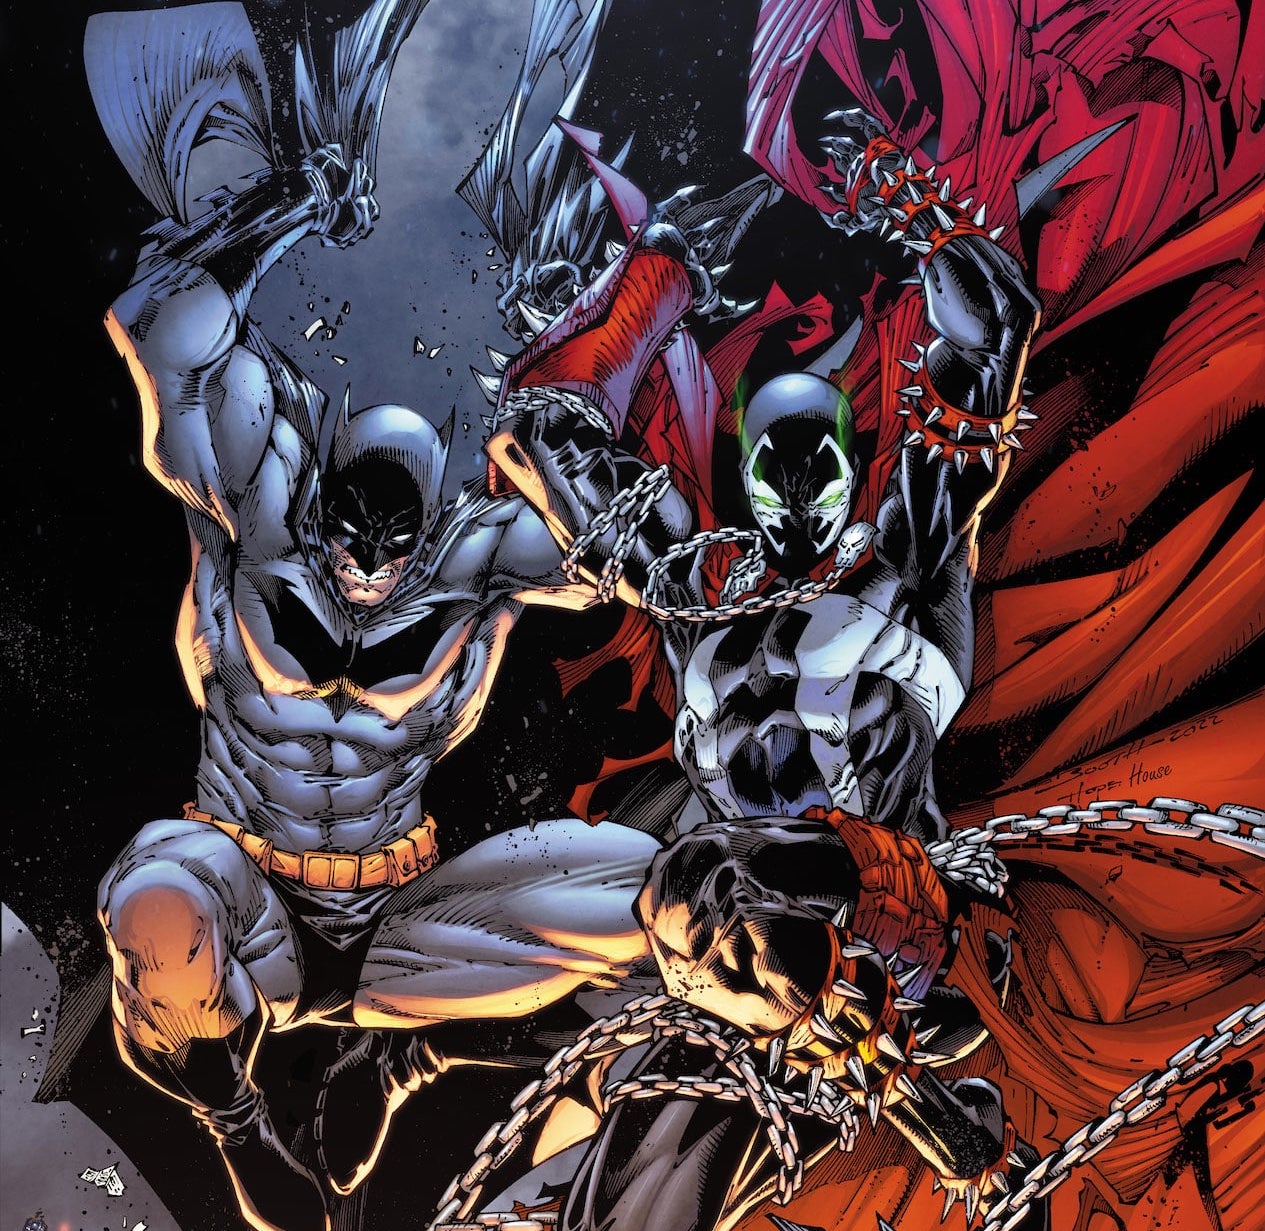 New story details and art reveal Todd McFarlane and Greg Capullo's 'Batman Spawn' #1